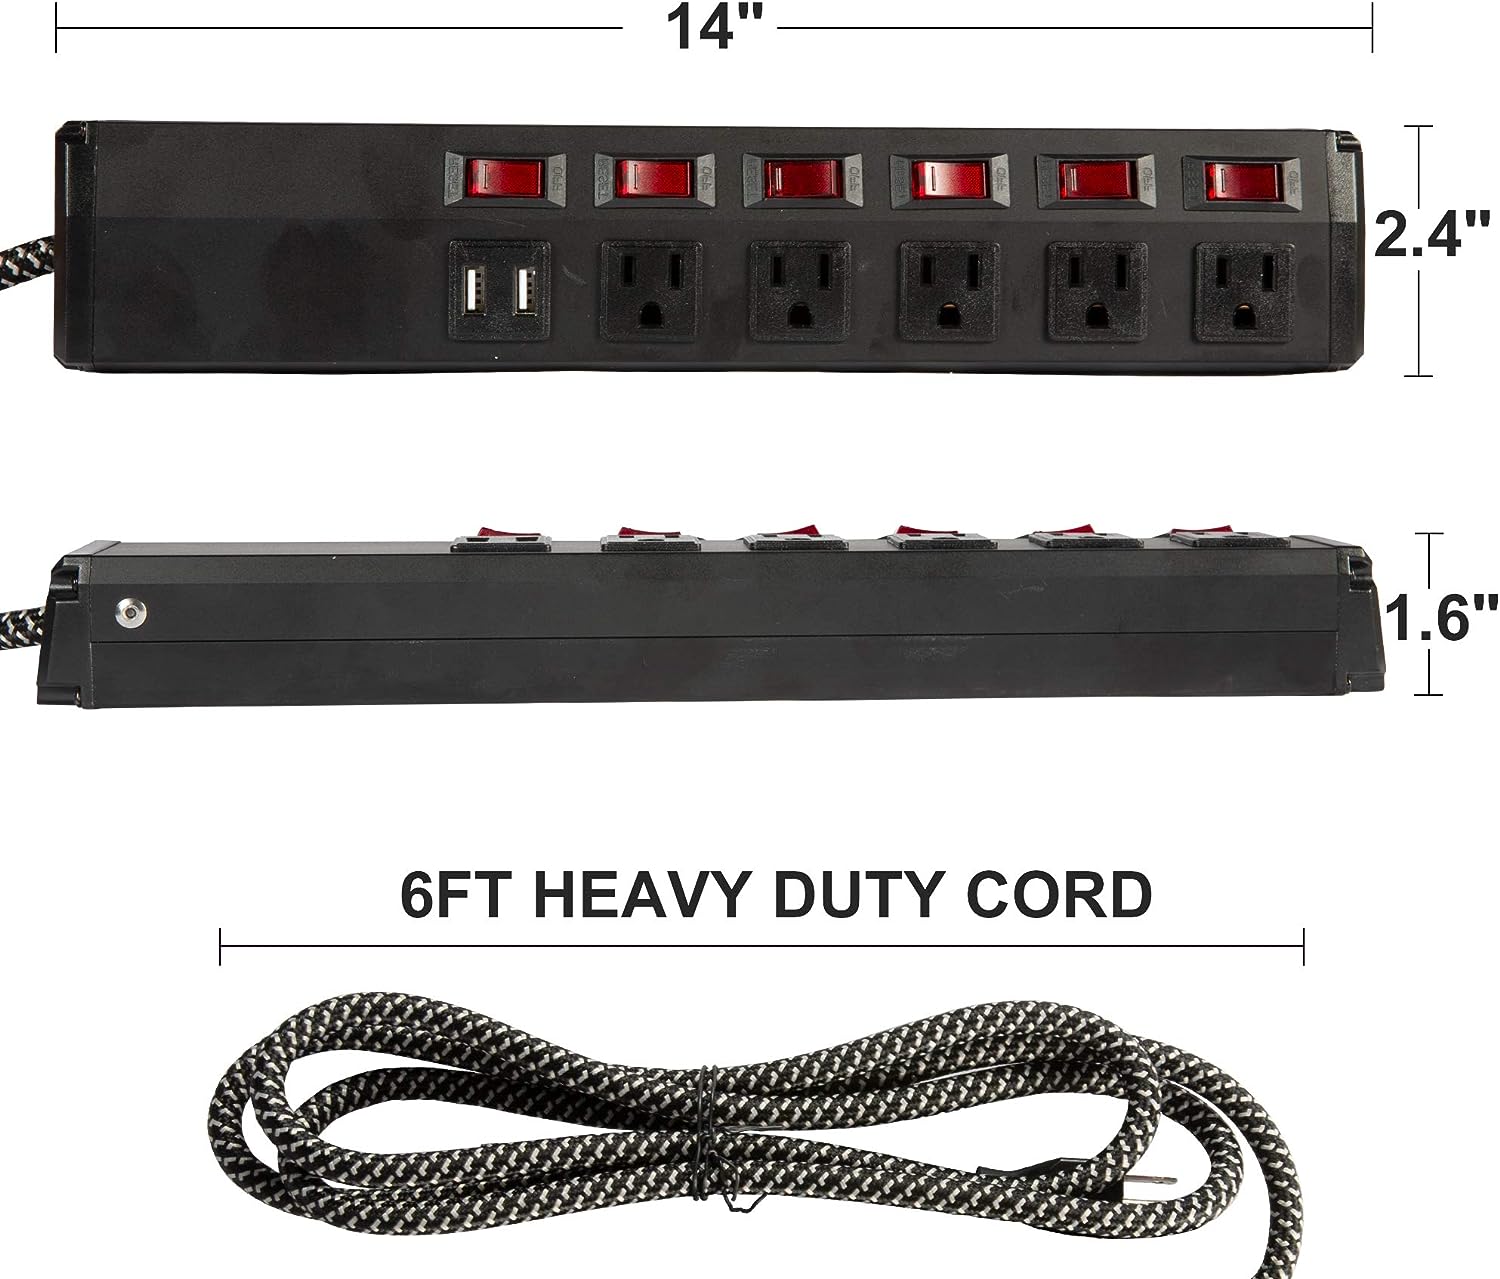 Set of 2 Power Strip 5 Outlets 2 USB Ports 6 Switches with Surge Protector Wall Mount, Black